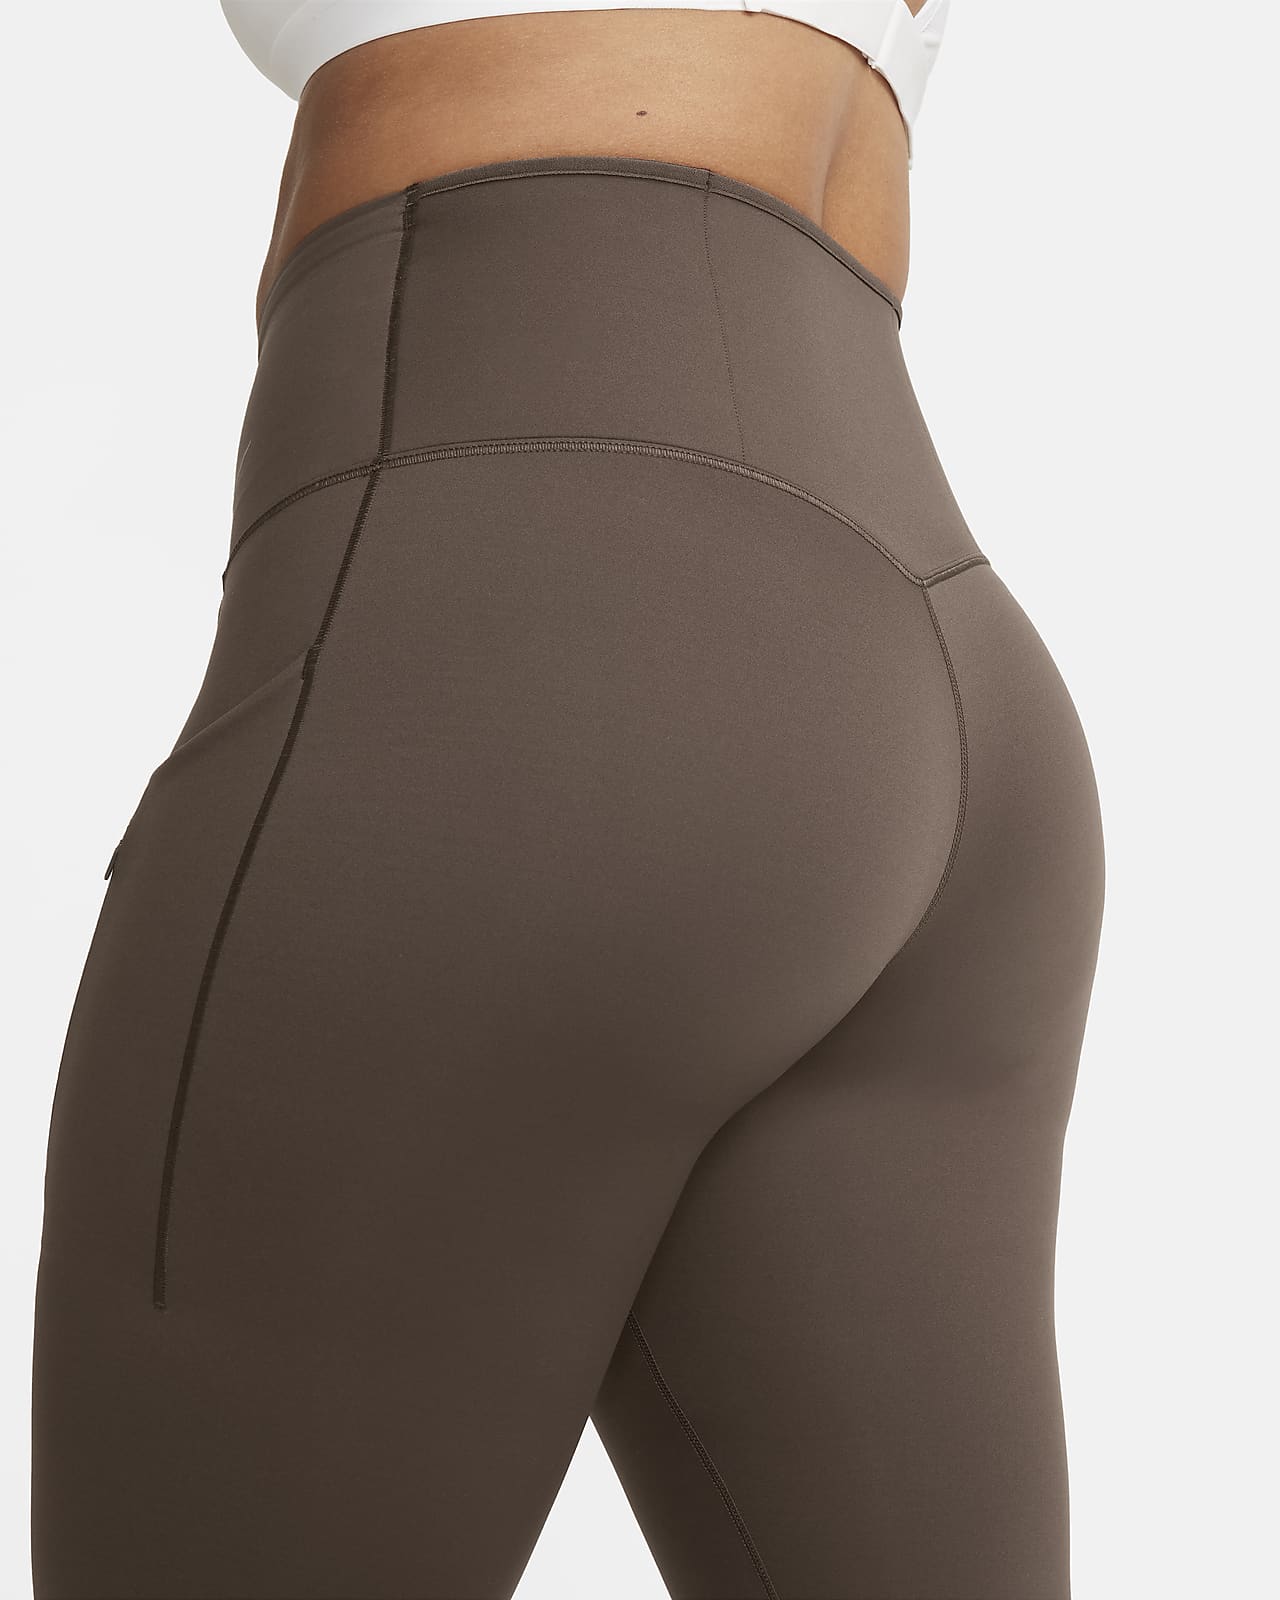 Nike Go Women's Firm-Support High-Waisted 7/8 Leggings with Pockets. Nike CA